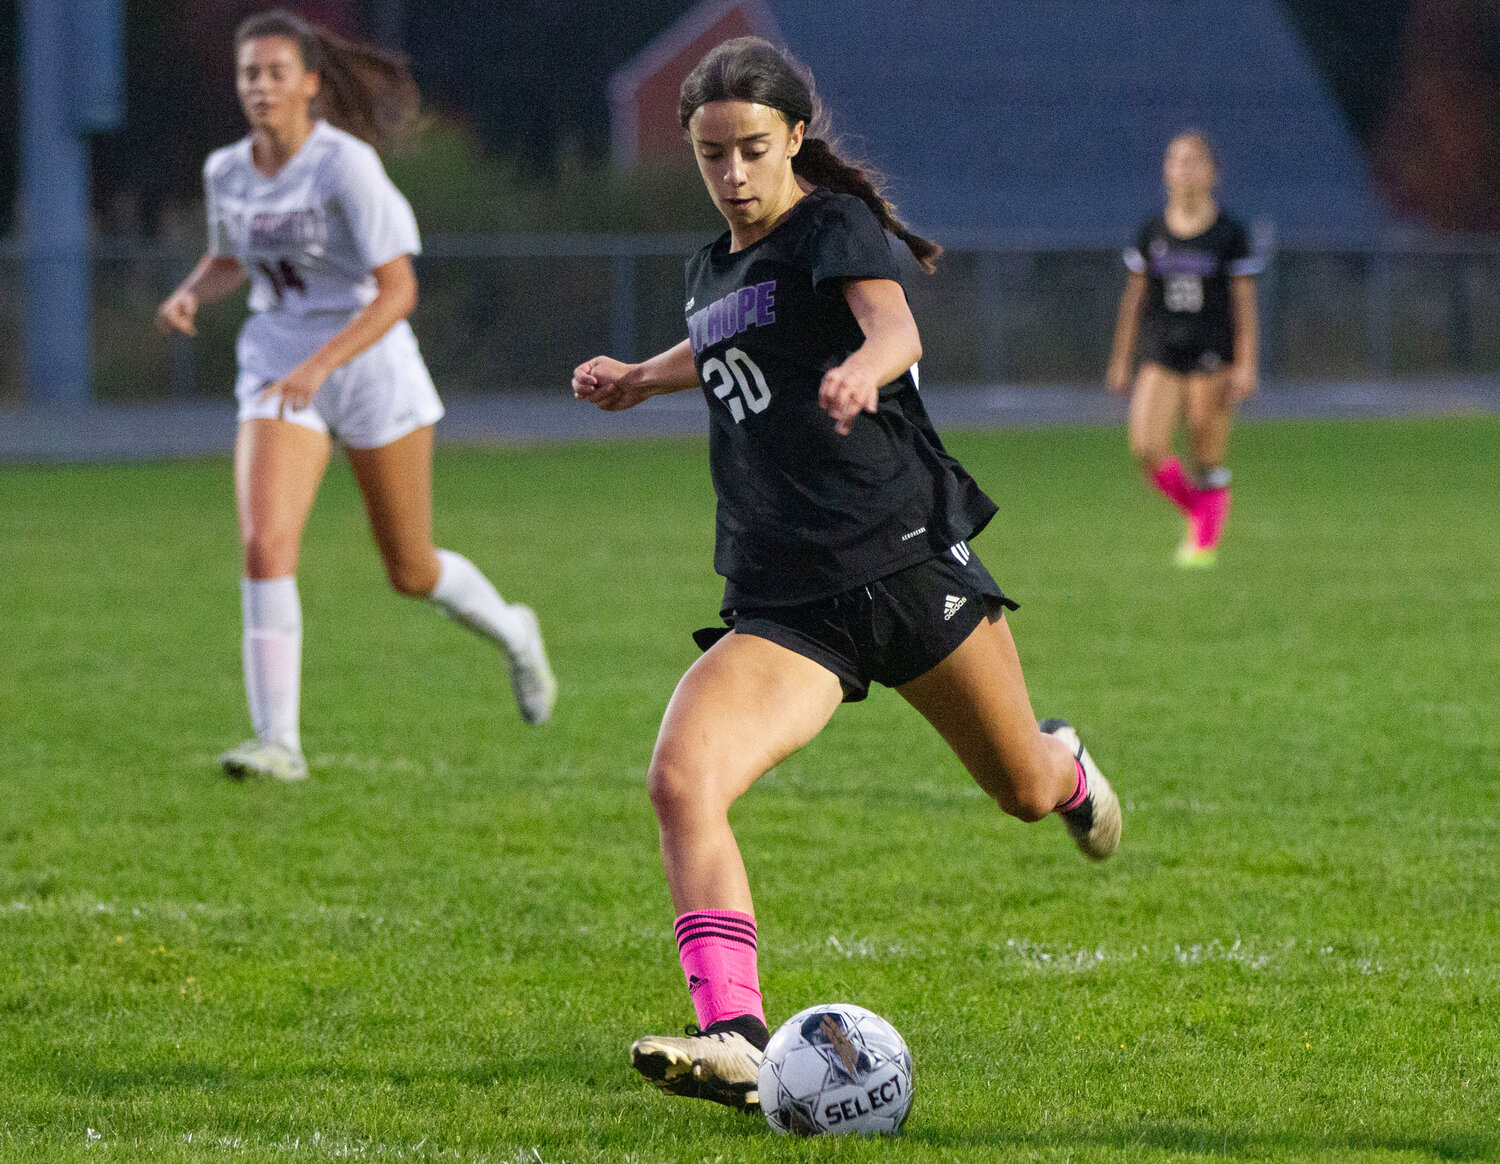 Thea Jackson dribbles through a pair of defenders for a kick on goal in the first half of the Huskies 3-1 win over East Greenwich. She kicked off the scoring in the second half. 